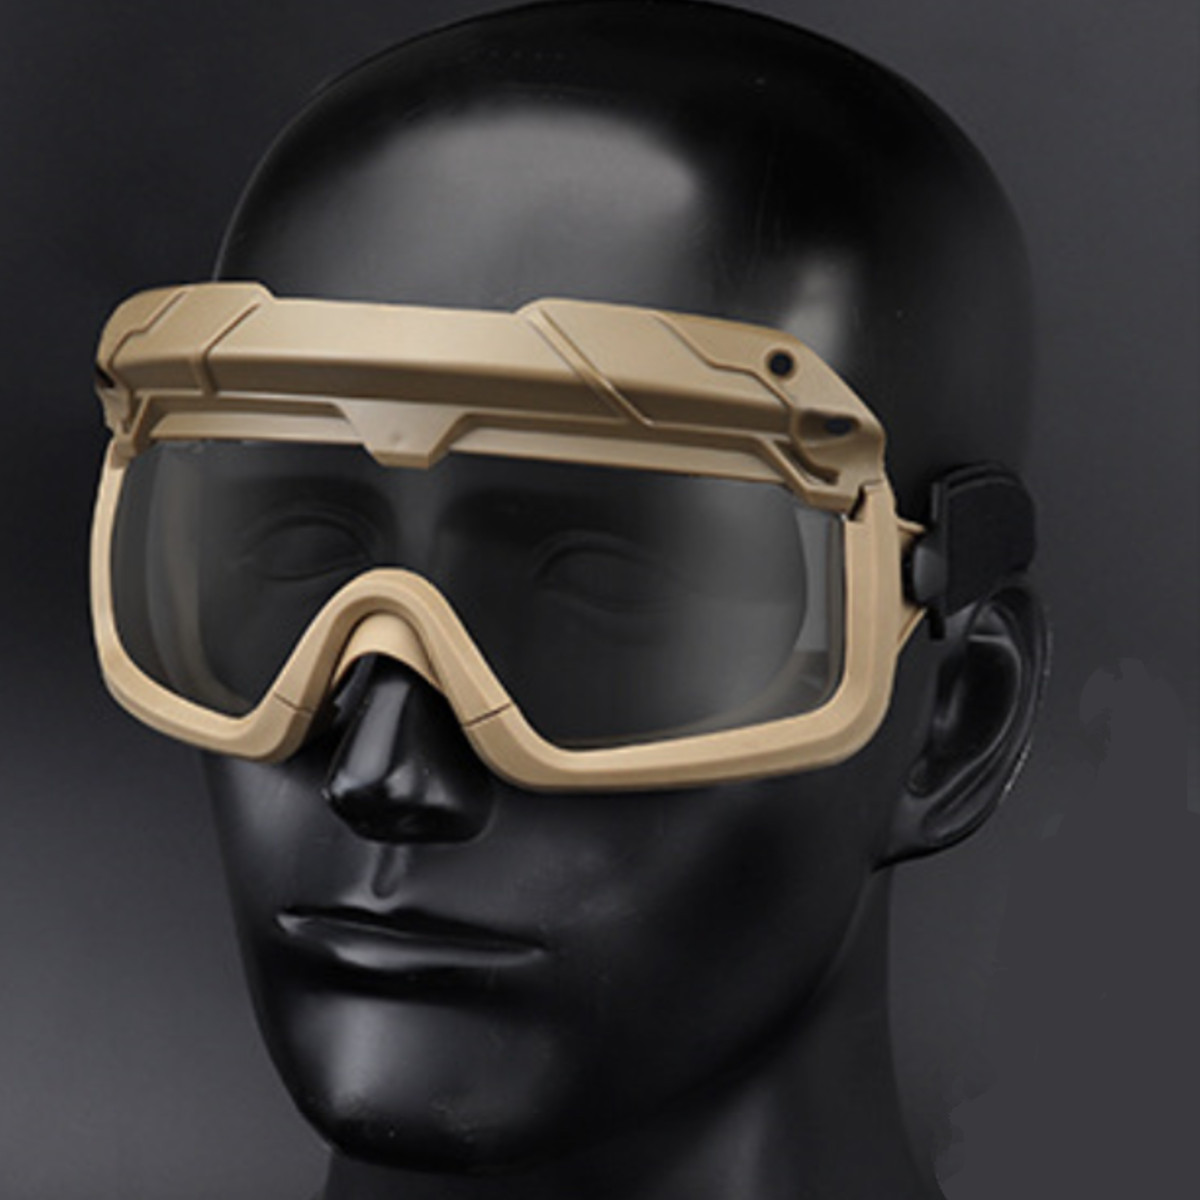 WoSporT-MA-114-Outdoor-Tactical-Glasses-Sunglasses-Cycling-Glasses-CS-Field-Protective-Eyewear-1635053-4